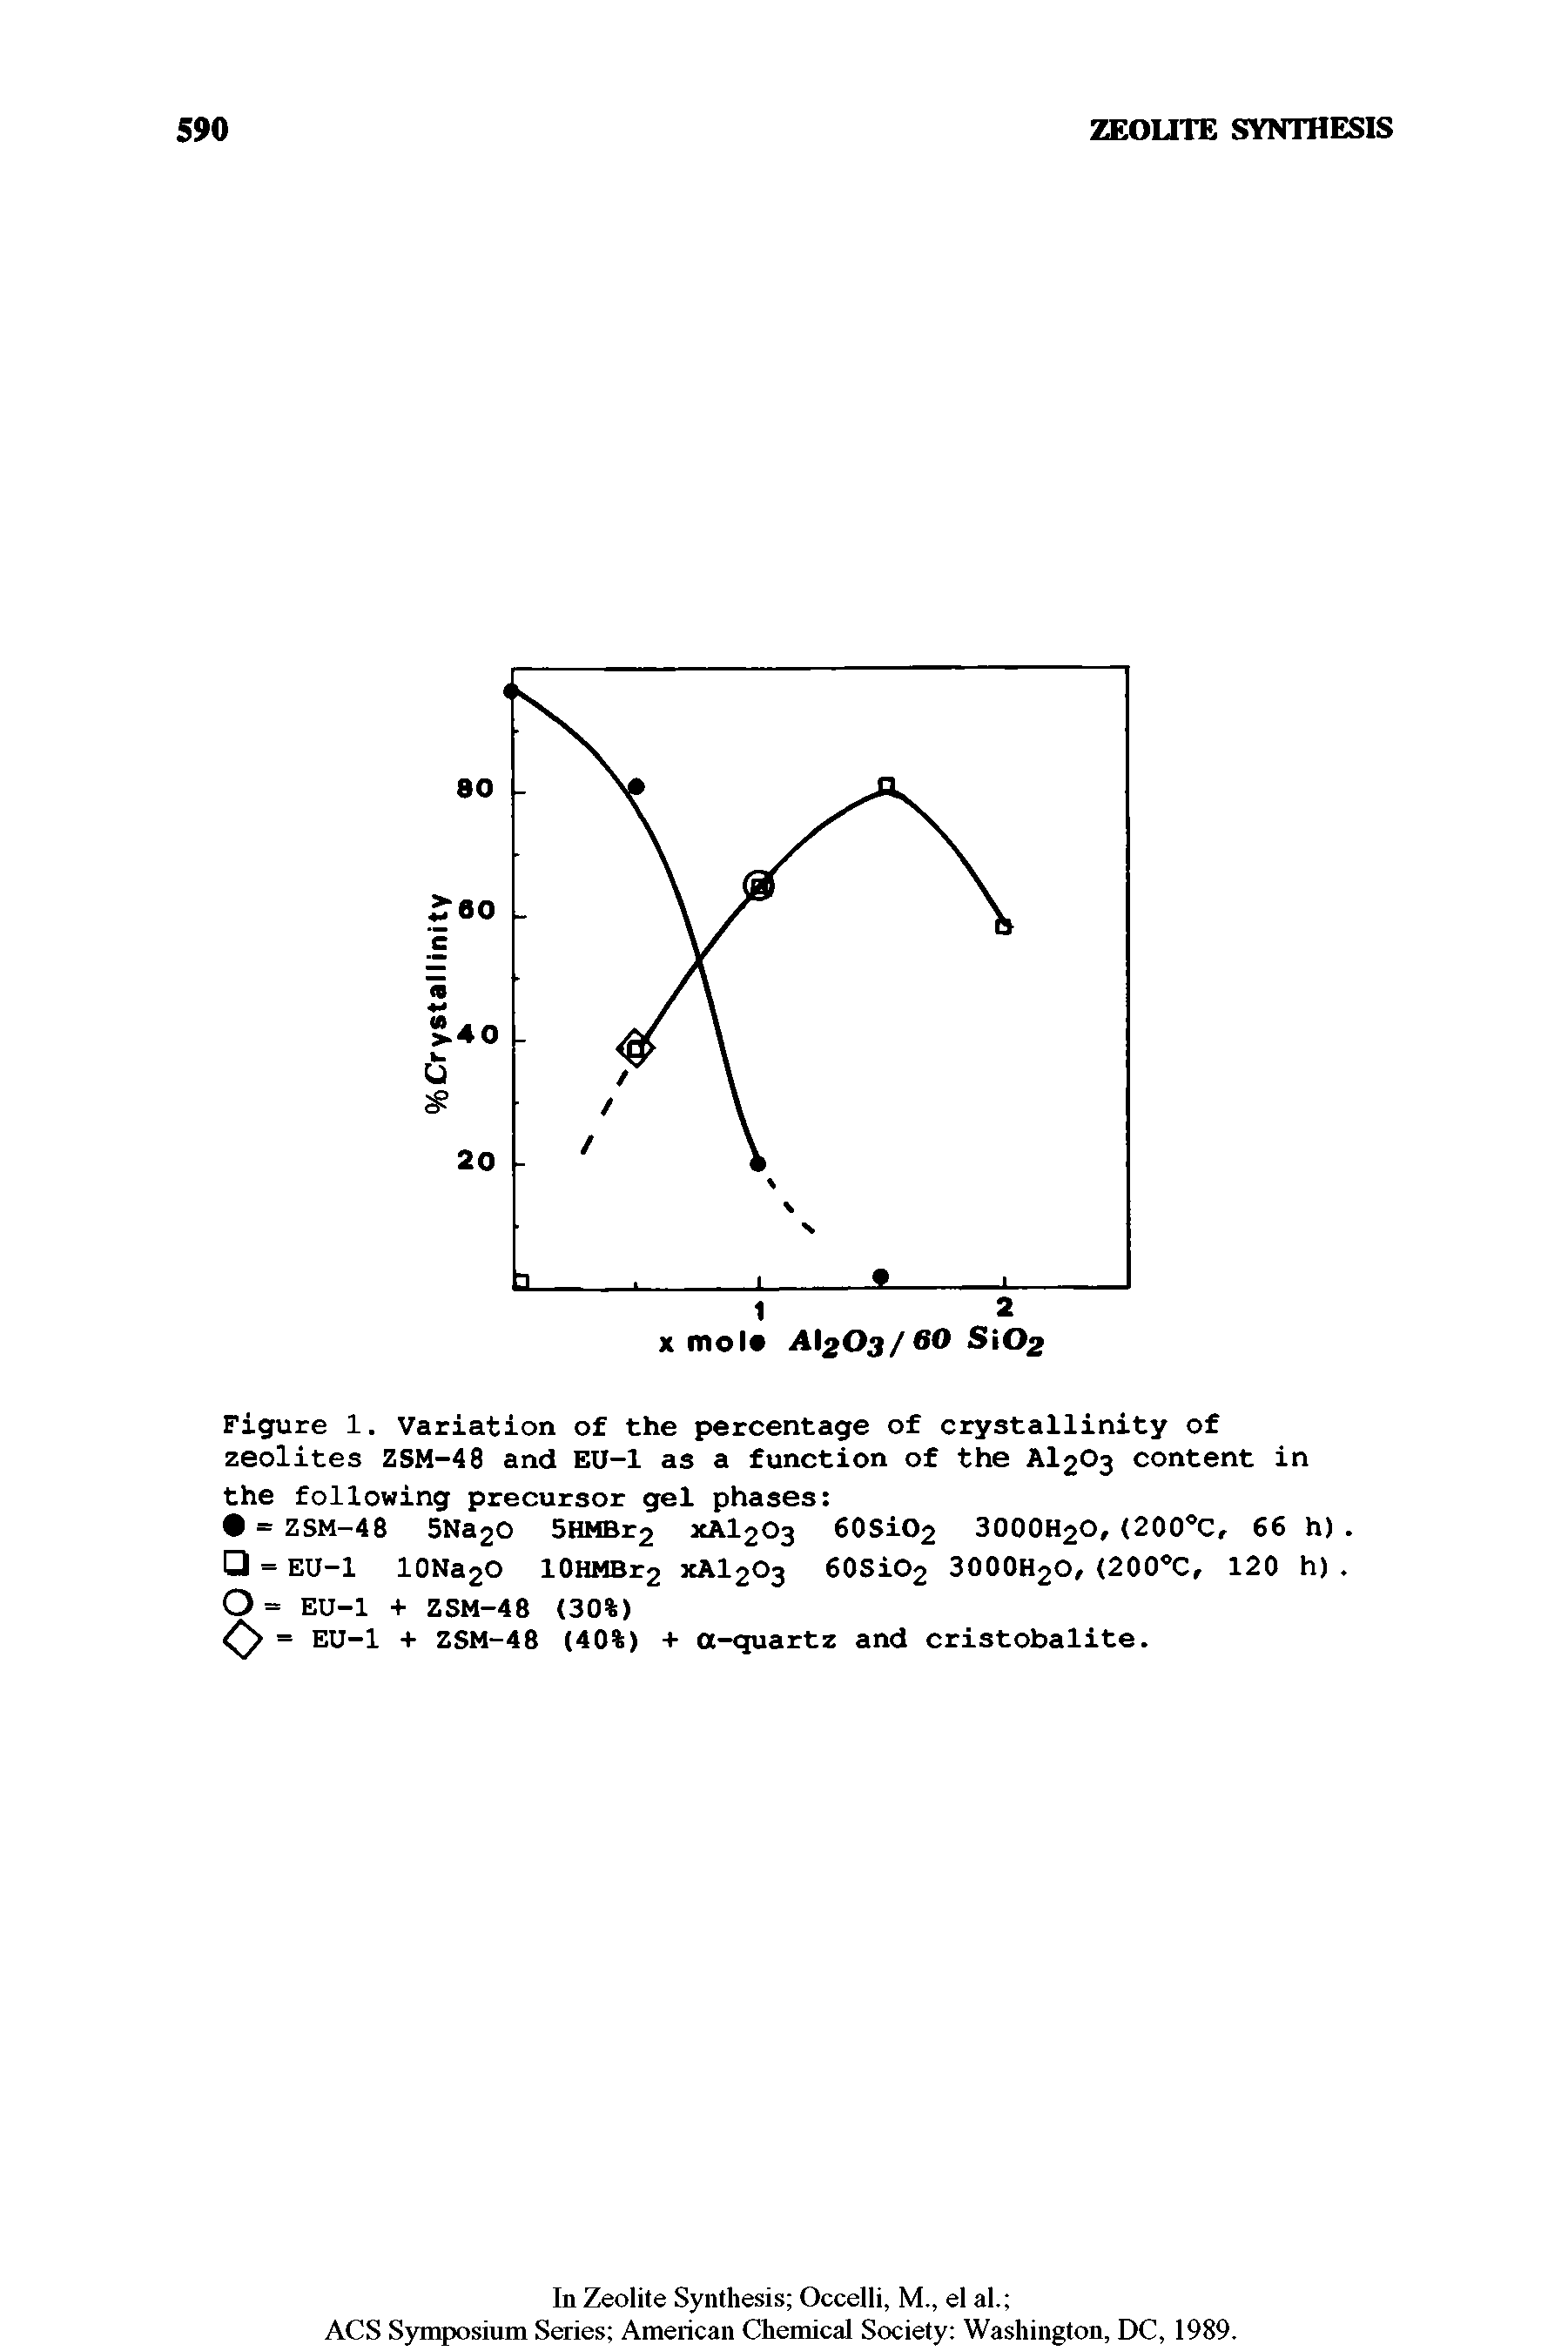 Figure 1. Variation of the percentage of crystallinity of zeolites ZSM-48 and EU-1 as a function of the AI2O3 content in the following precursor gel phases ...